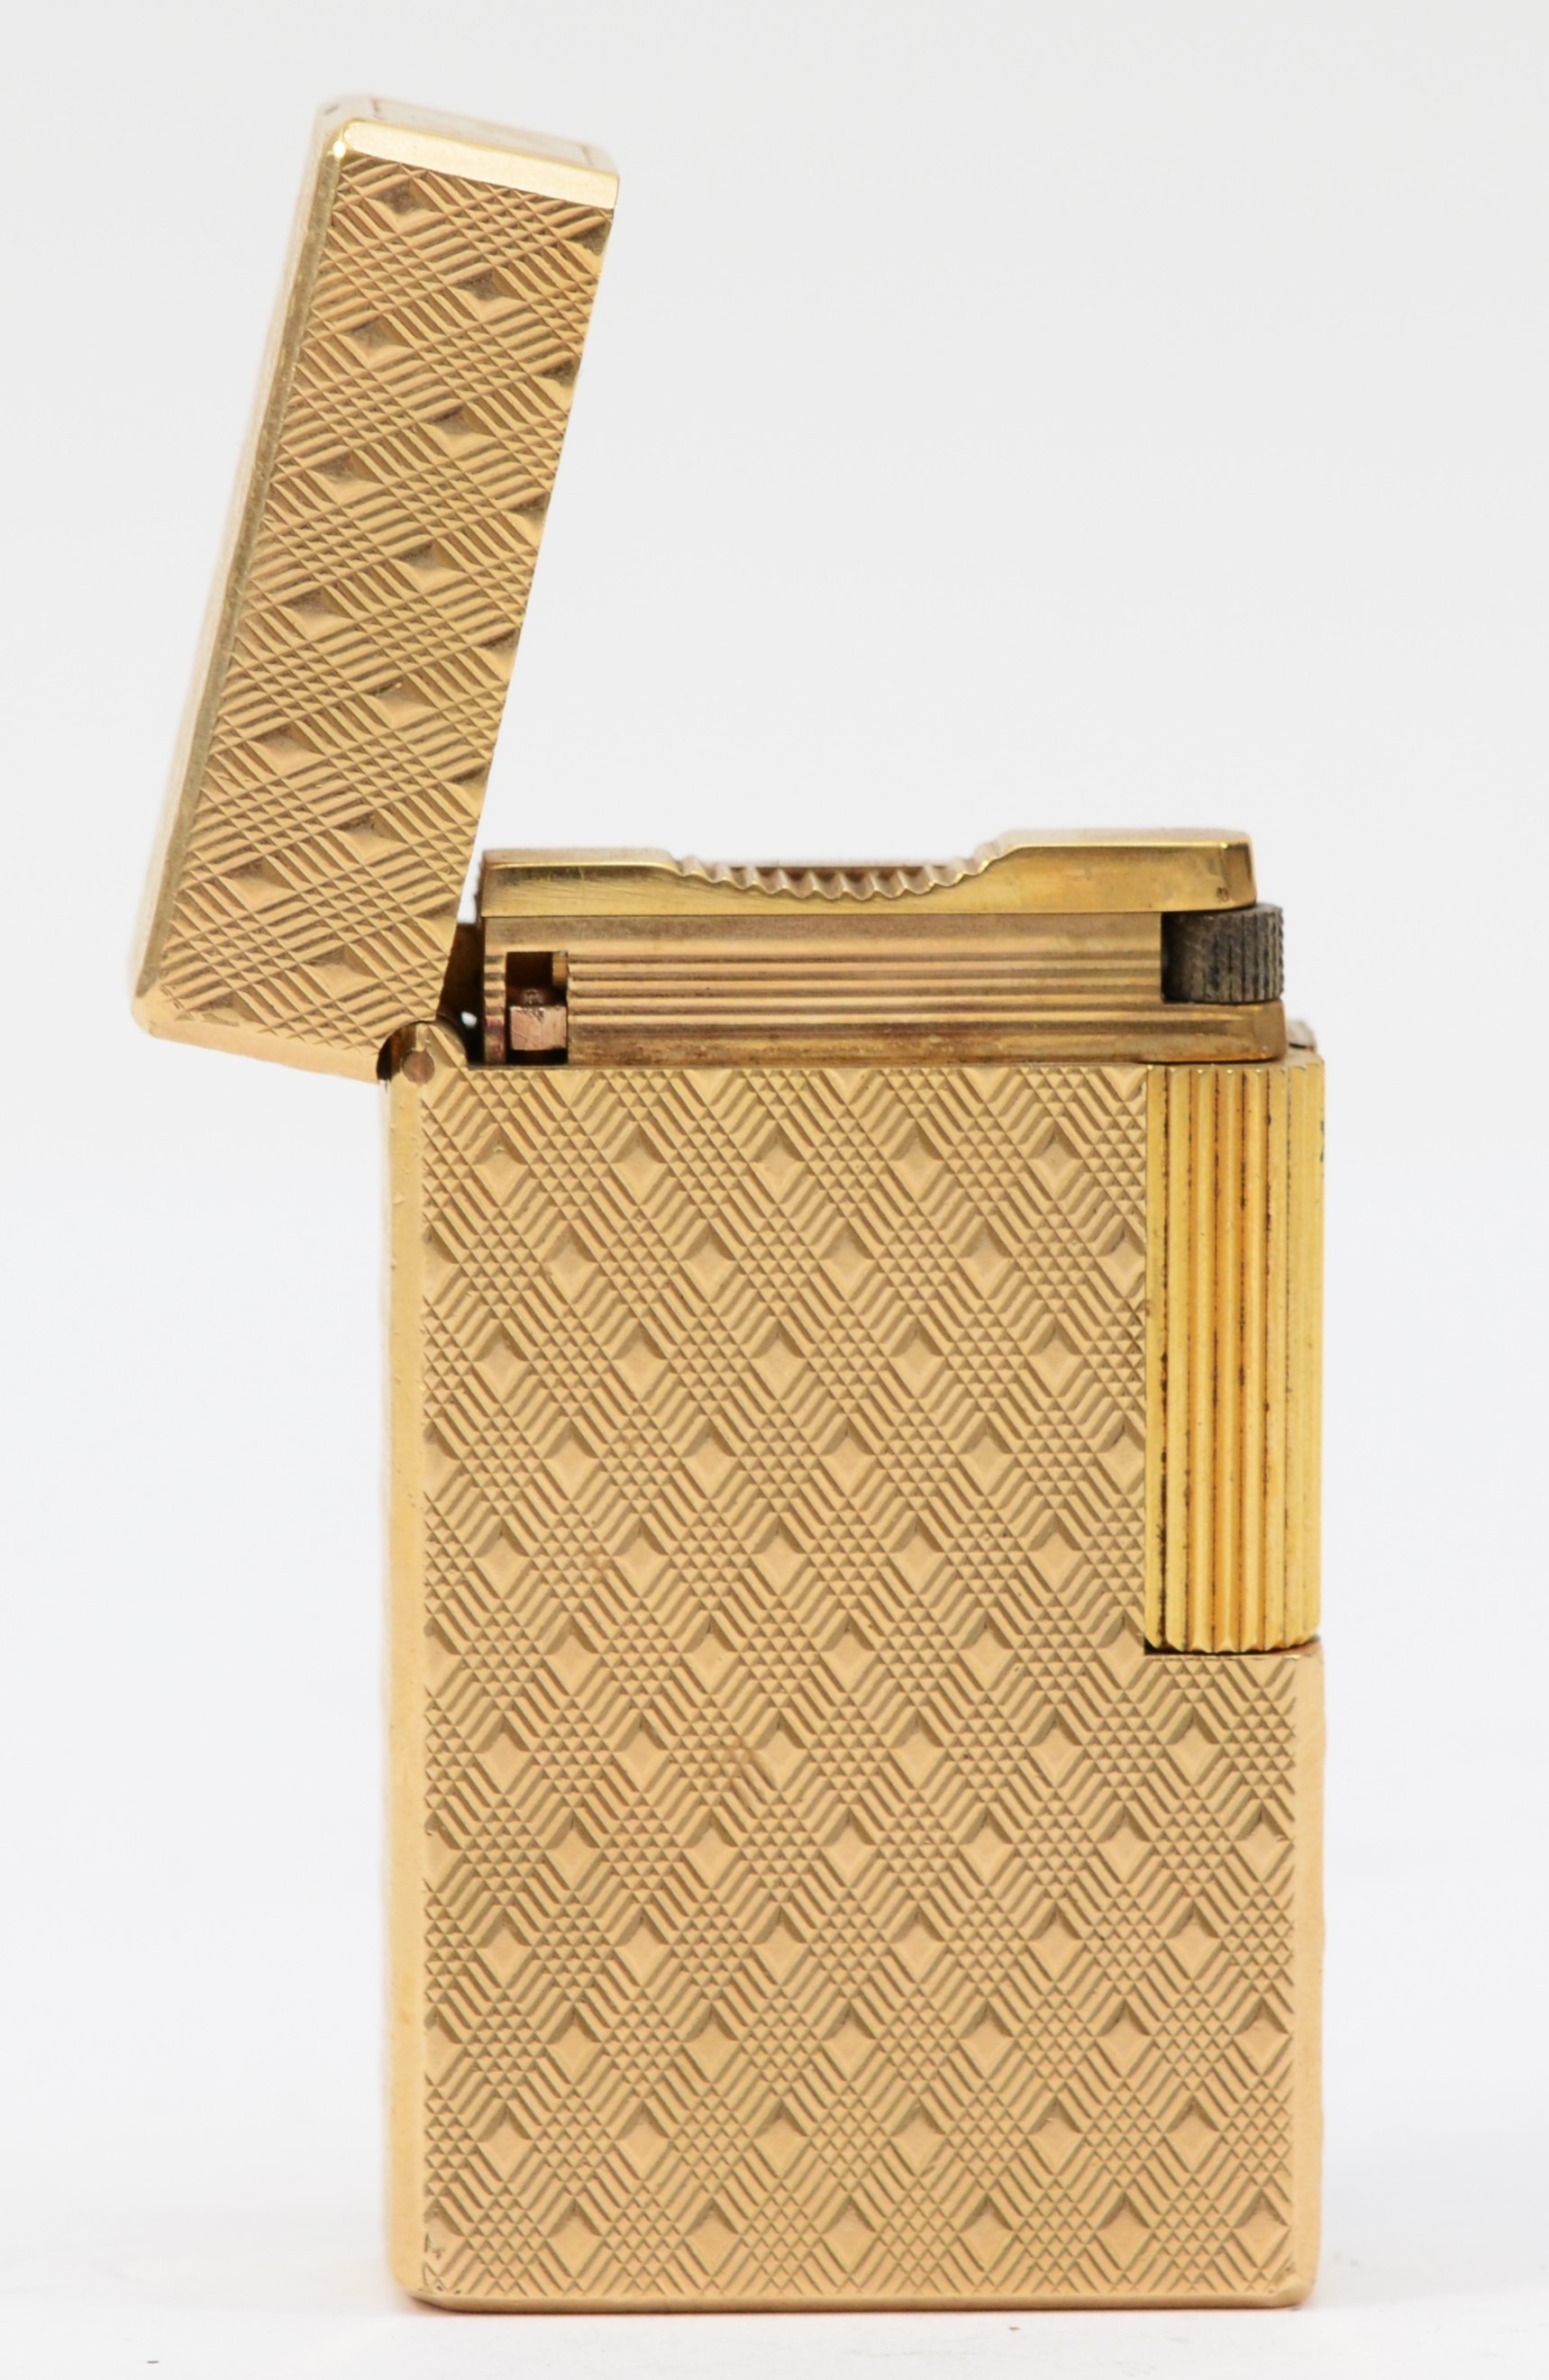 S.T. Dupont, Paris, a gold plated gas lighter, R5EH26, with cross hatched body, 5.8cm